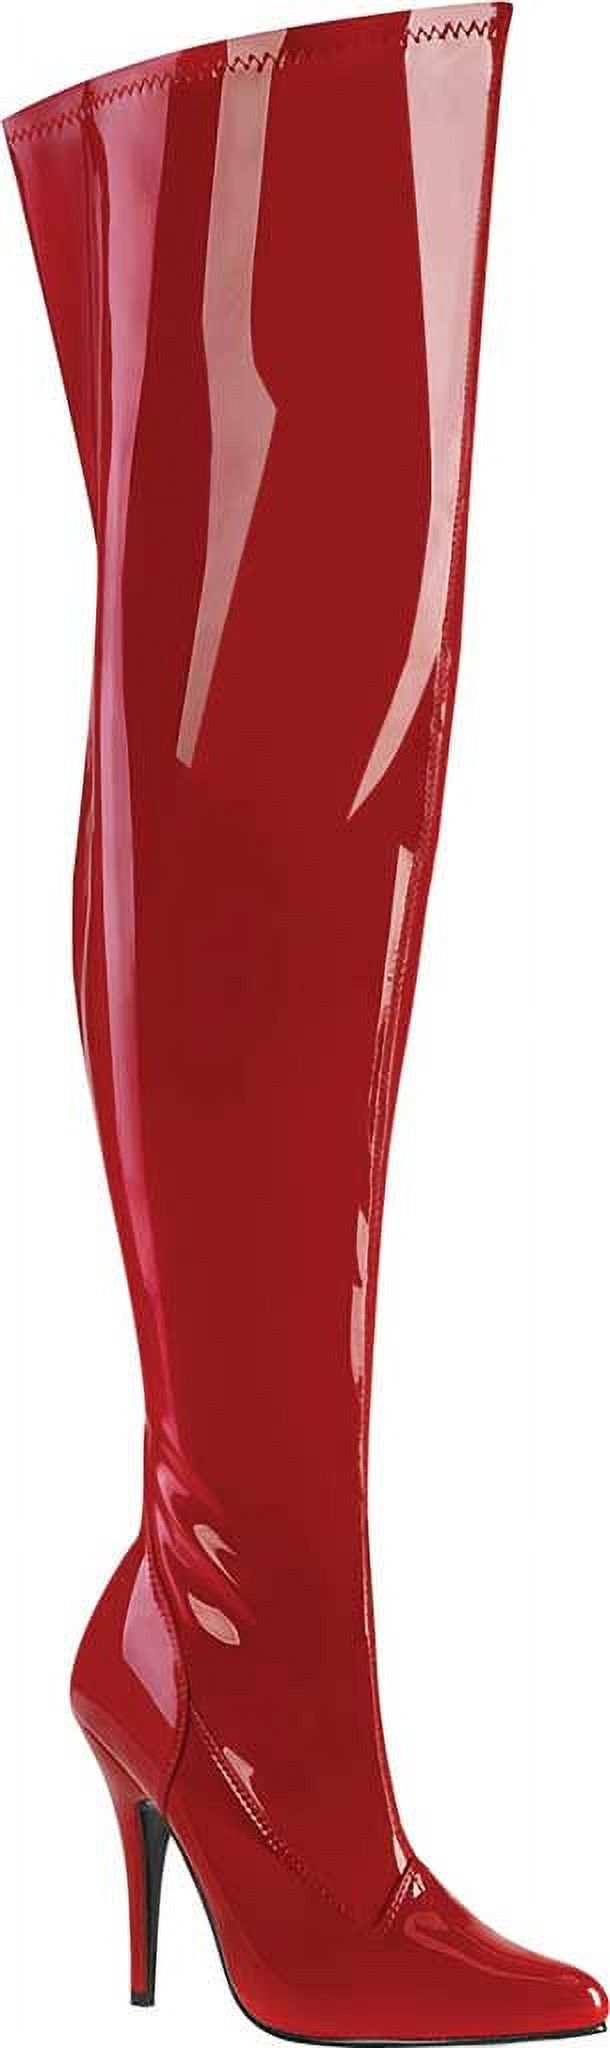 Women's Pleaser Pink Label Seduce 3000WC Wide Calf Thigh High Boot - image 1 of 2